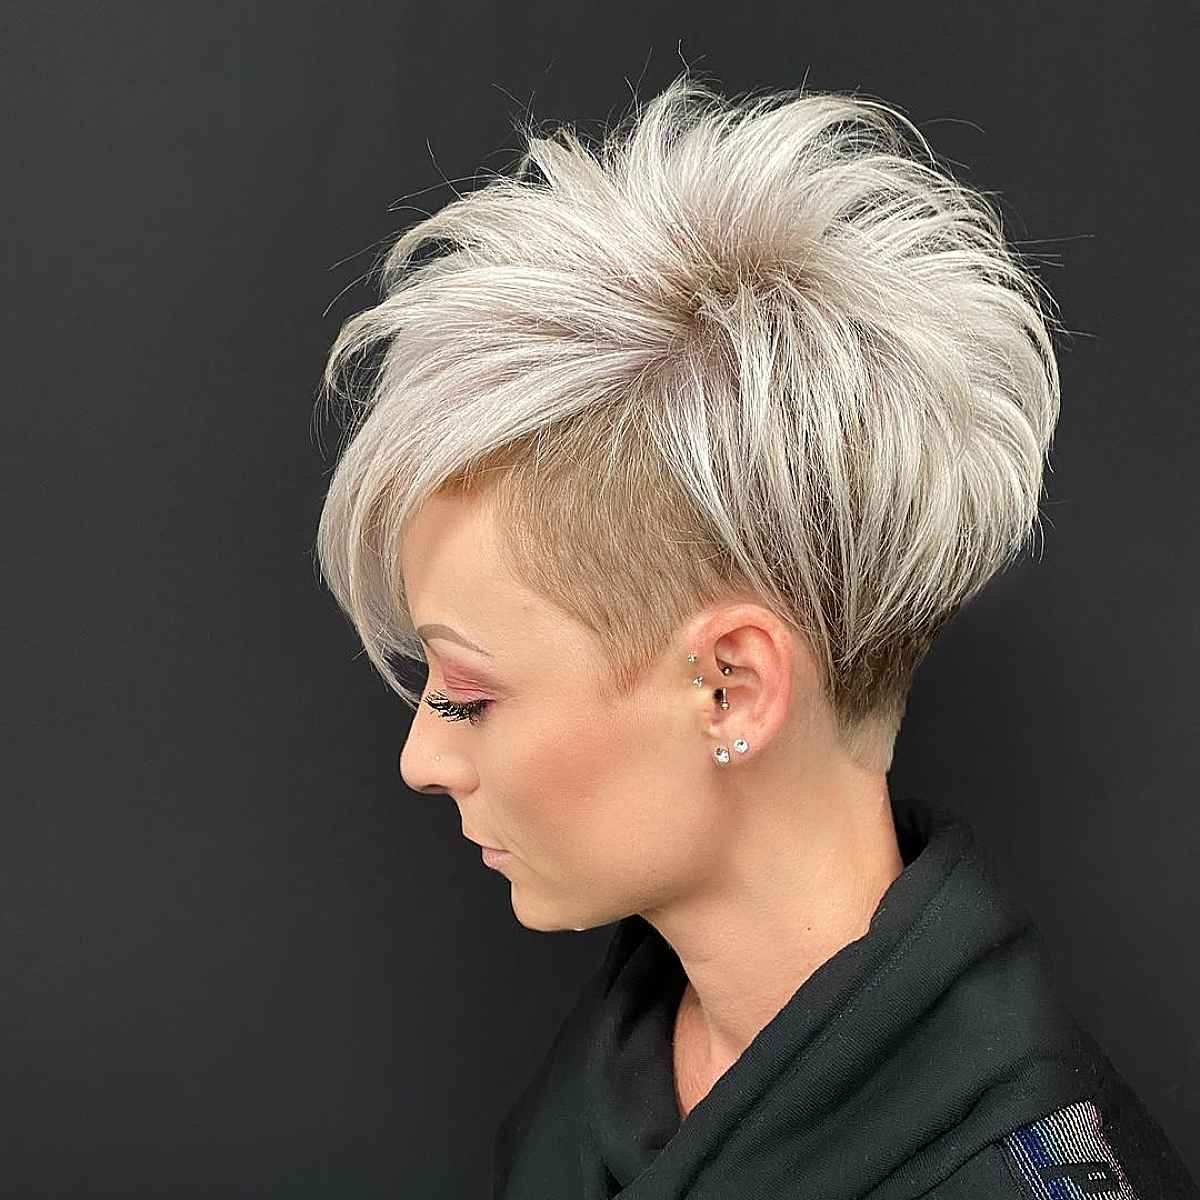 Tapered Pixie Cut for Women Over 30